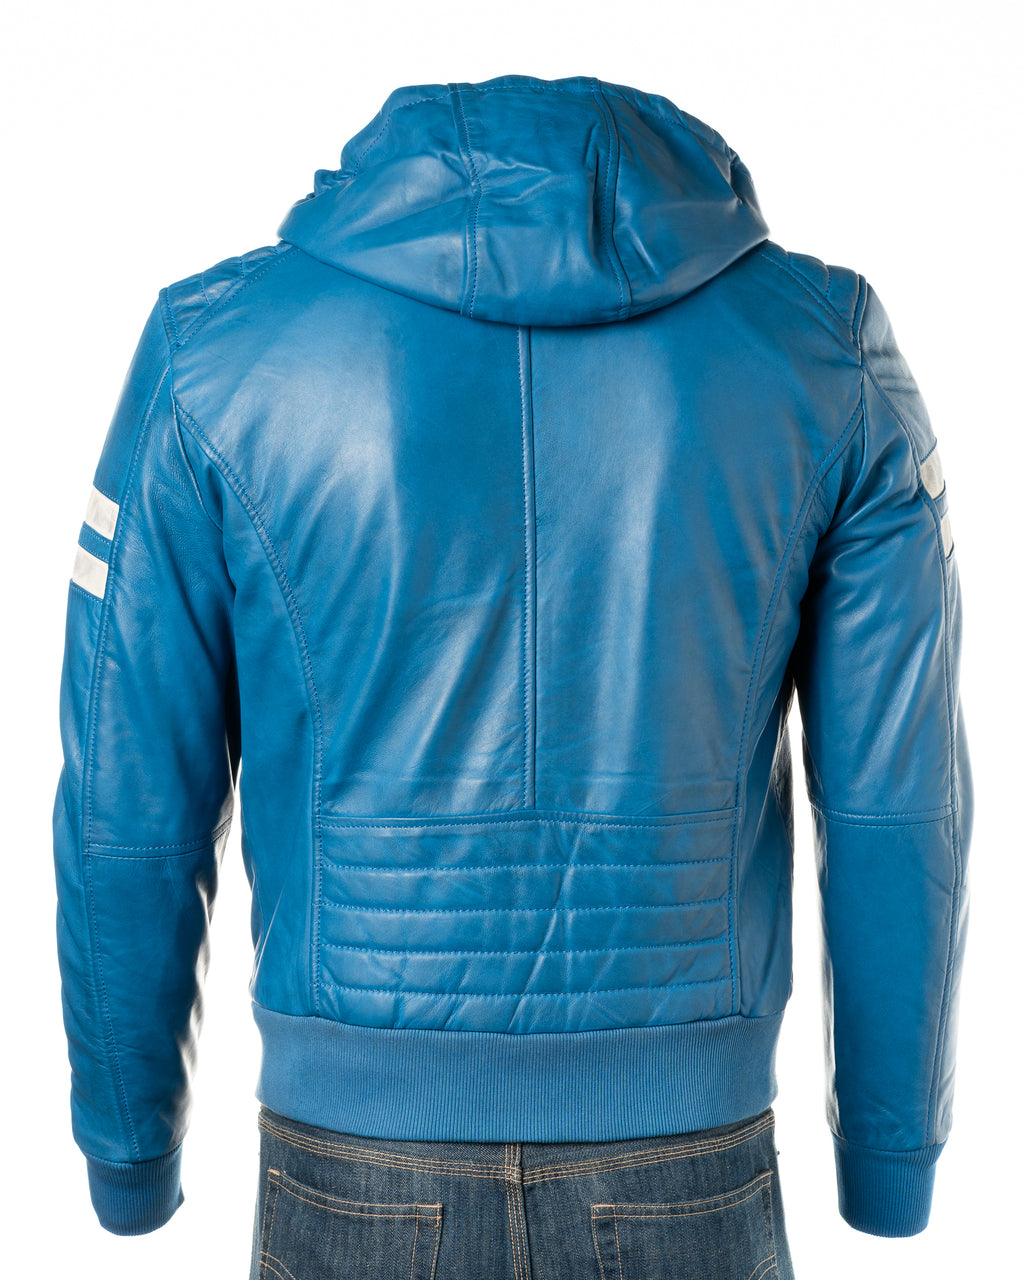 Men's Blue Hooded Contrast Panelled Racer Style Leather Jacket: Rolando